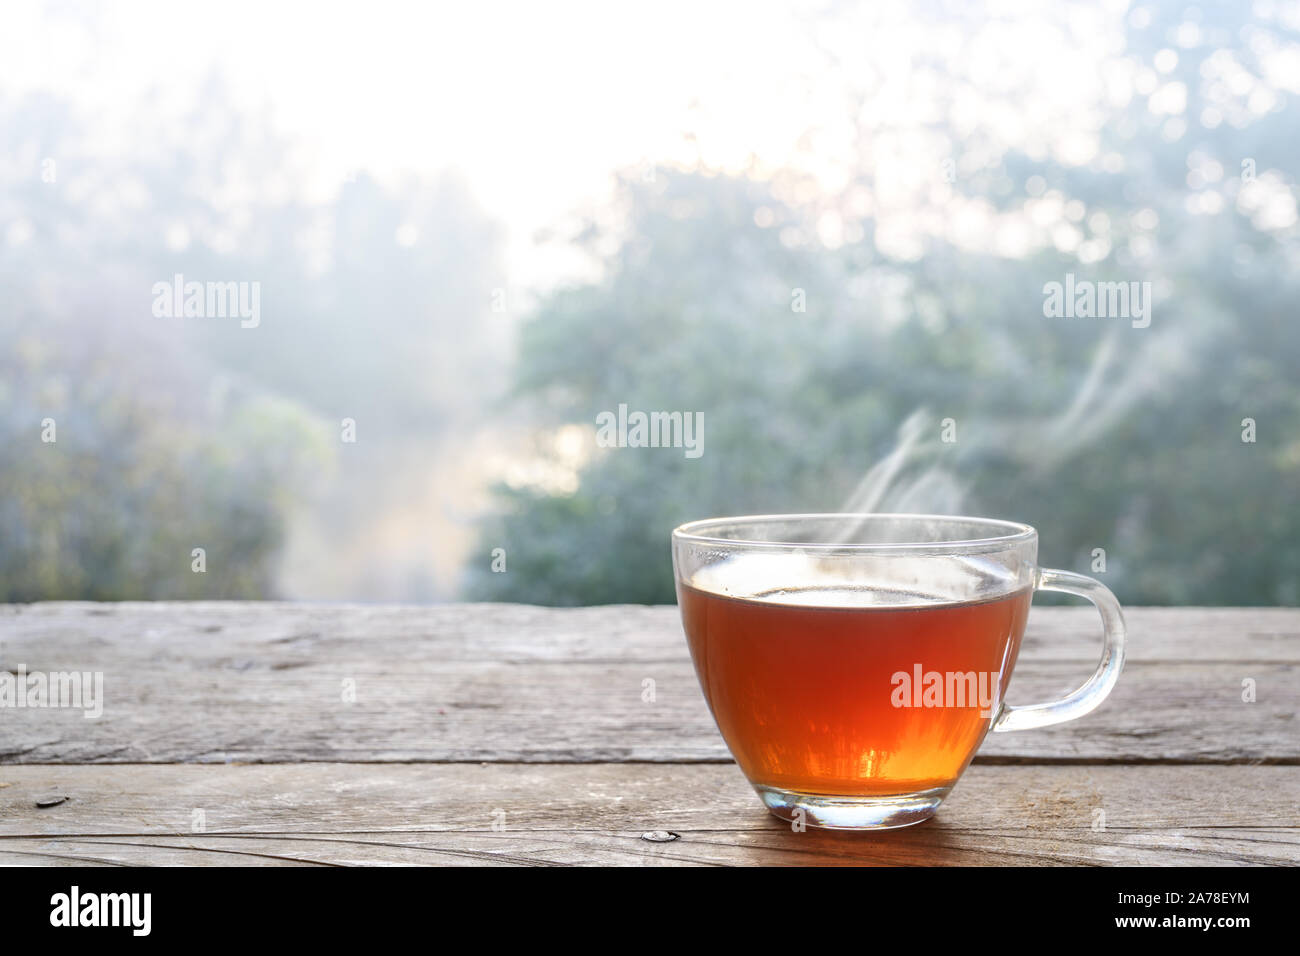 Hot steaming tea in a glass cup on a rustic wooden outdoor table on a cold foggy winter day, copy space, selected focus, narrow depth of field Stock Photo